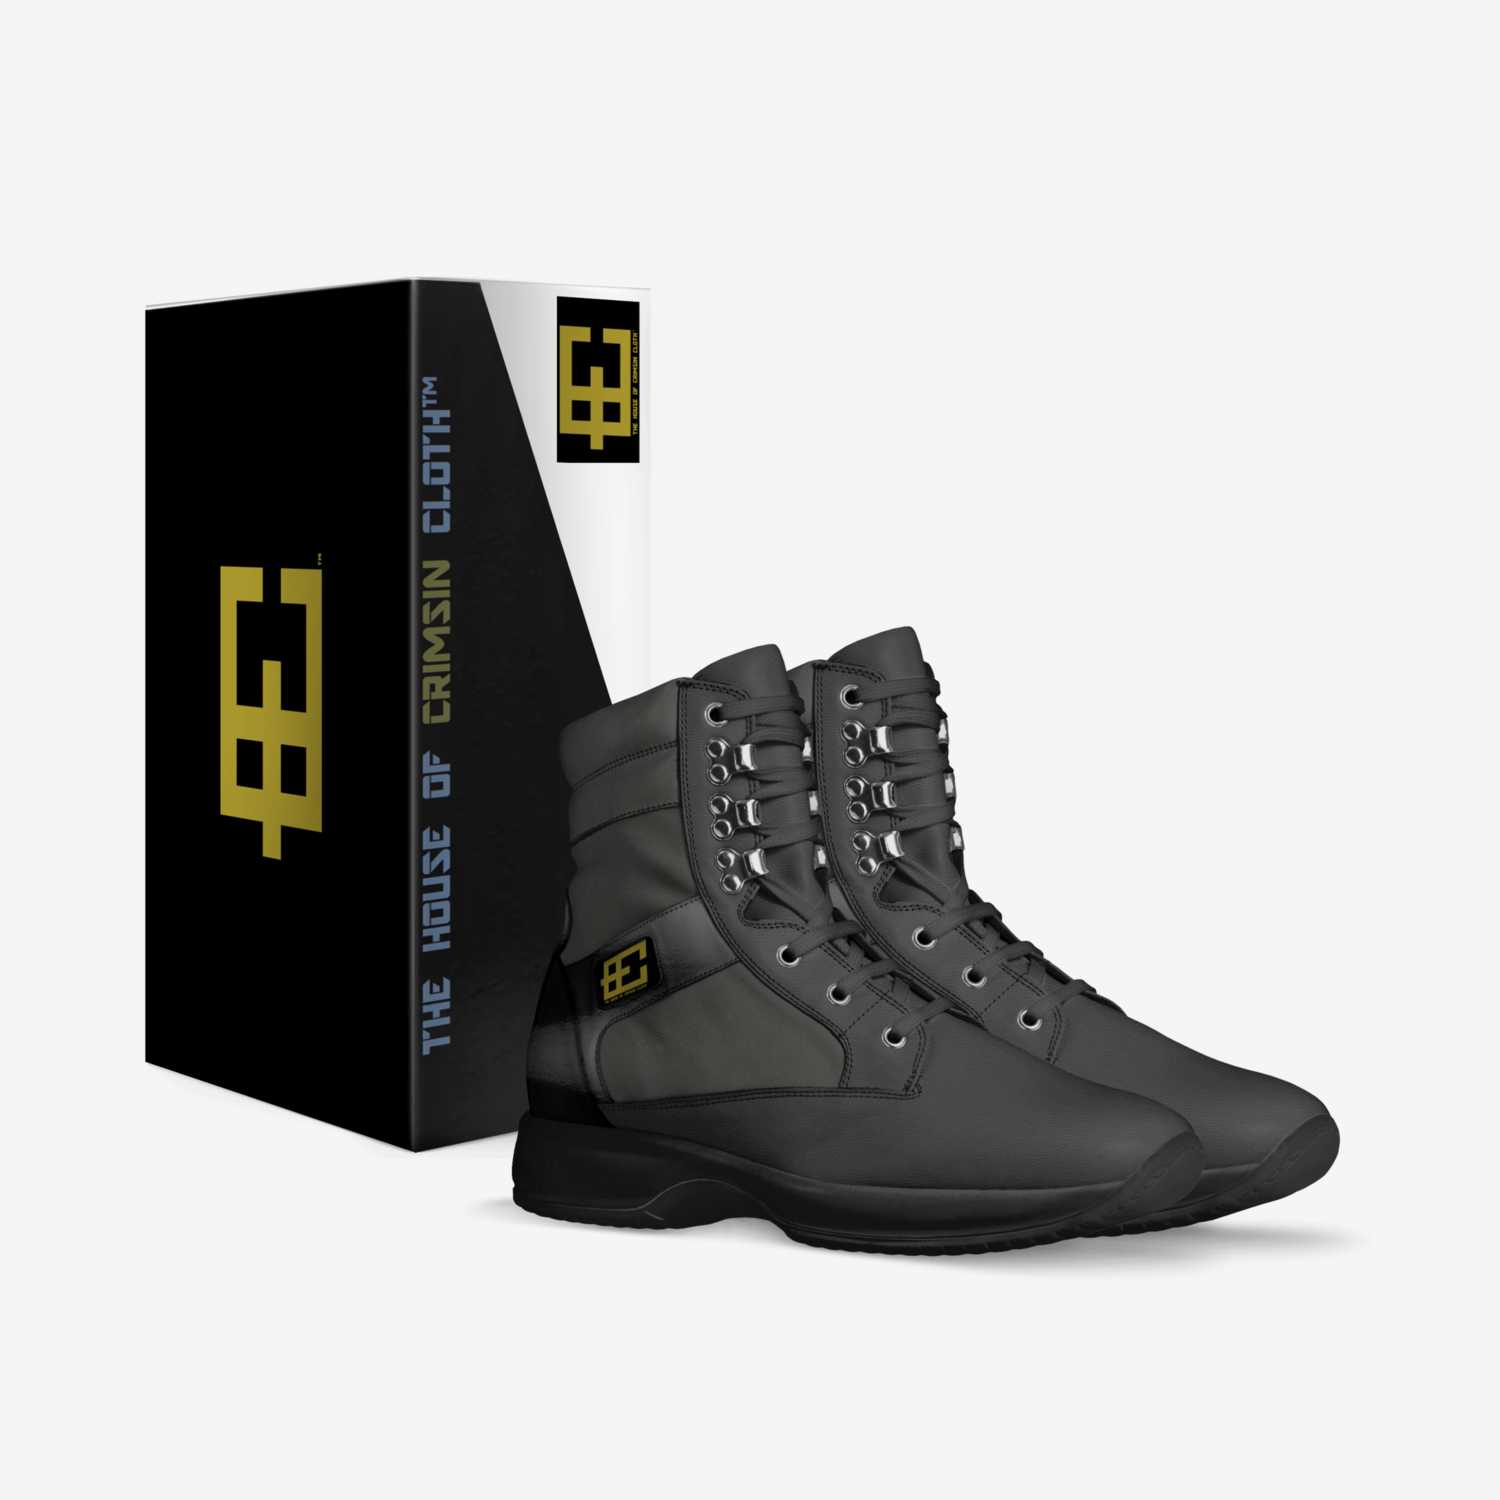 Squalo D'affari custom made in Italy shoes by Erik Champ Jr. | Box view